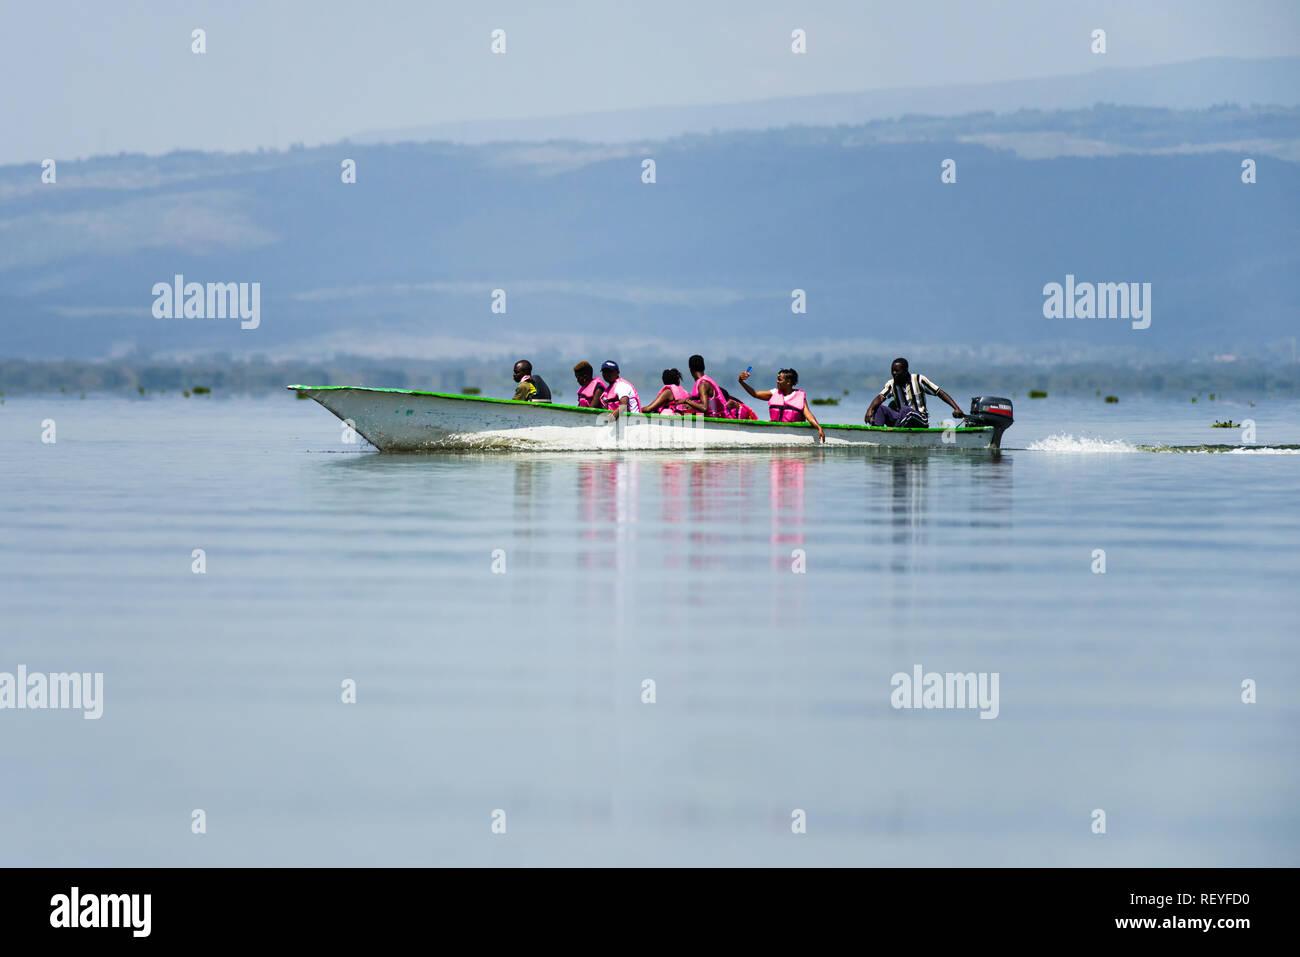 A group of African men and women taking an excursion in a fibreglass motorboat on Lake Naivasha, Kenya Stock Photo